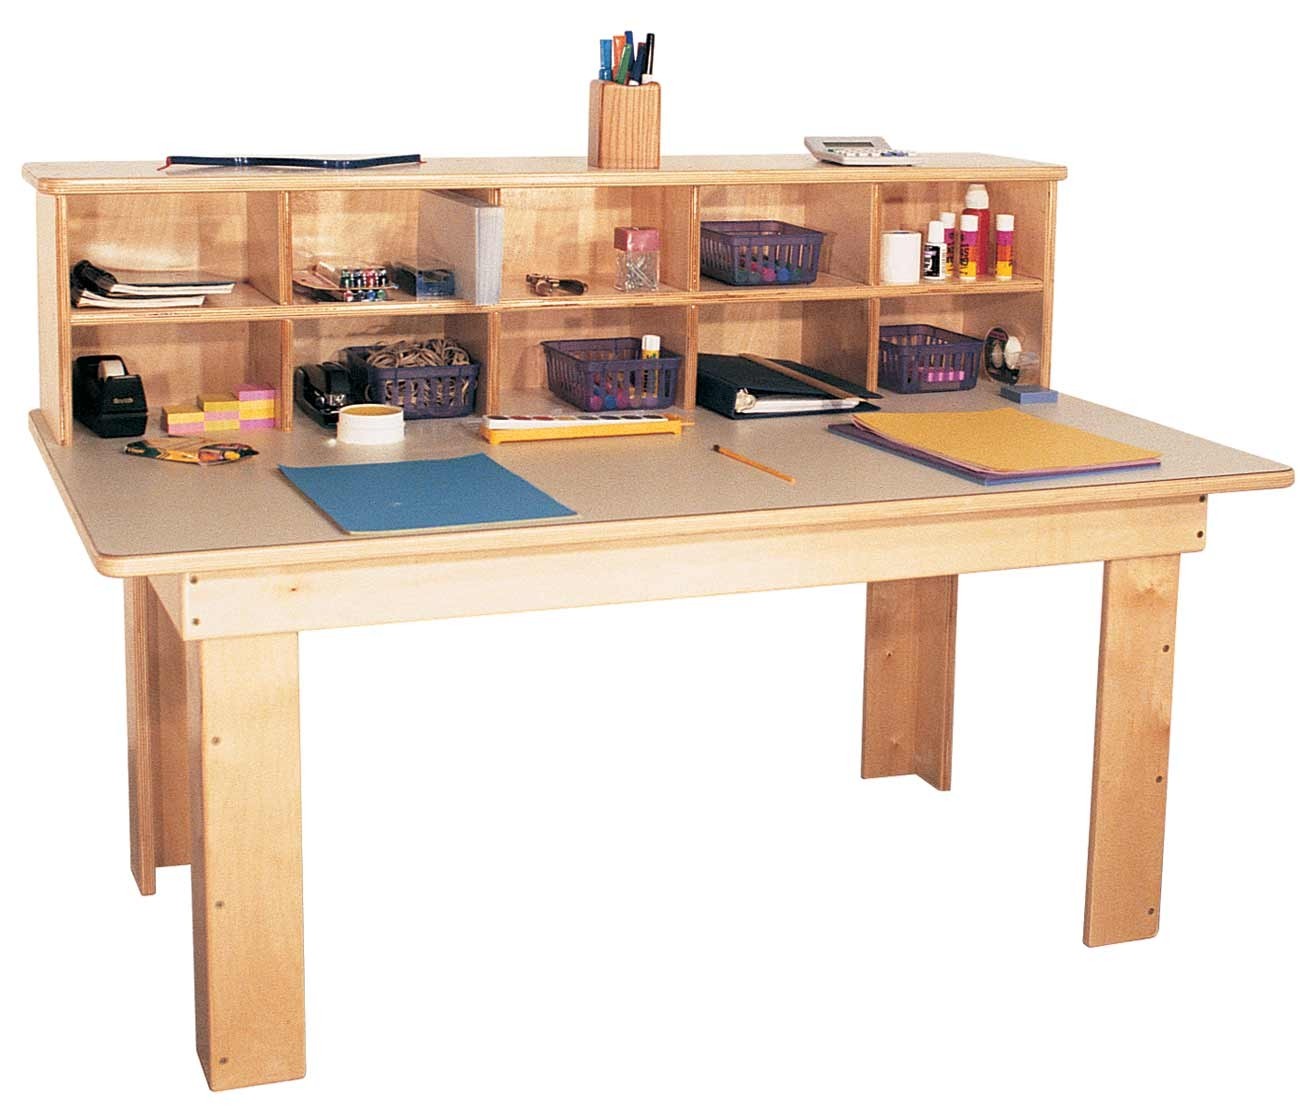 Kindergarten school age writing center table with laminate top storage